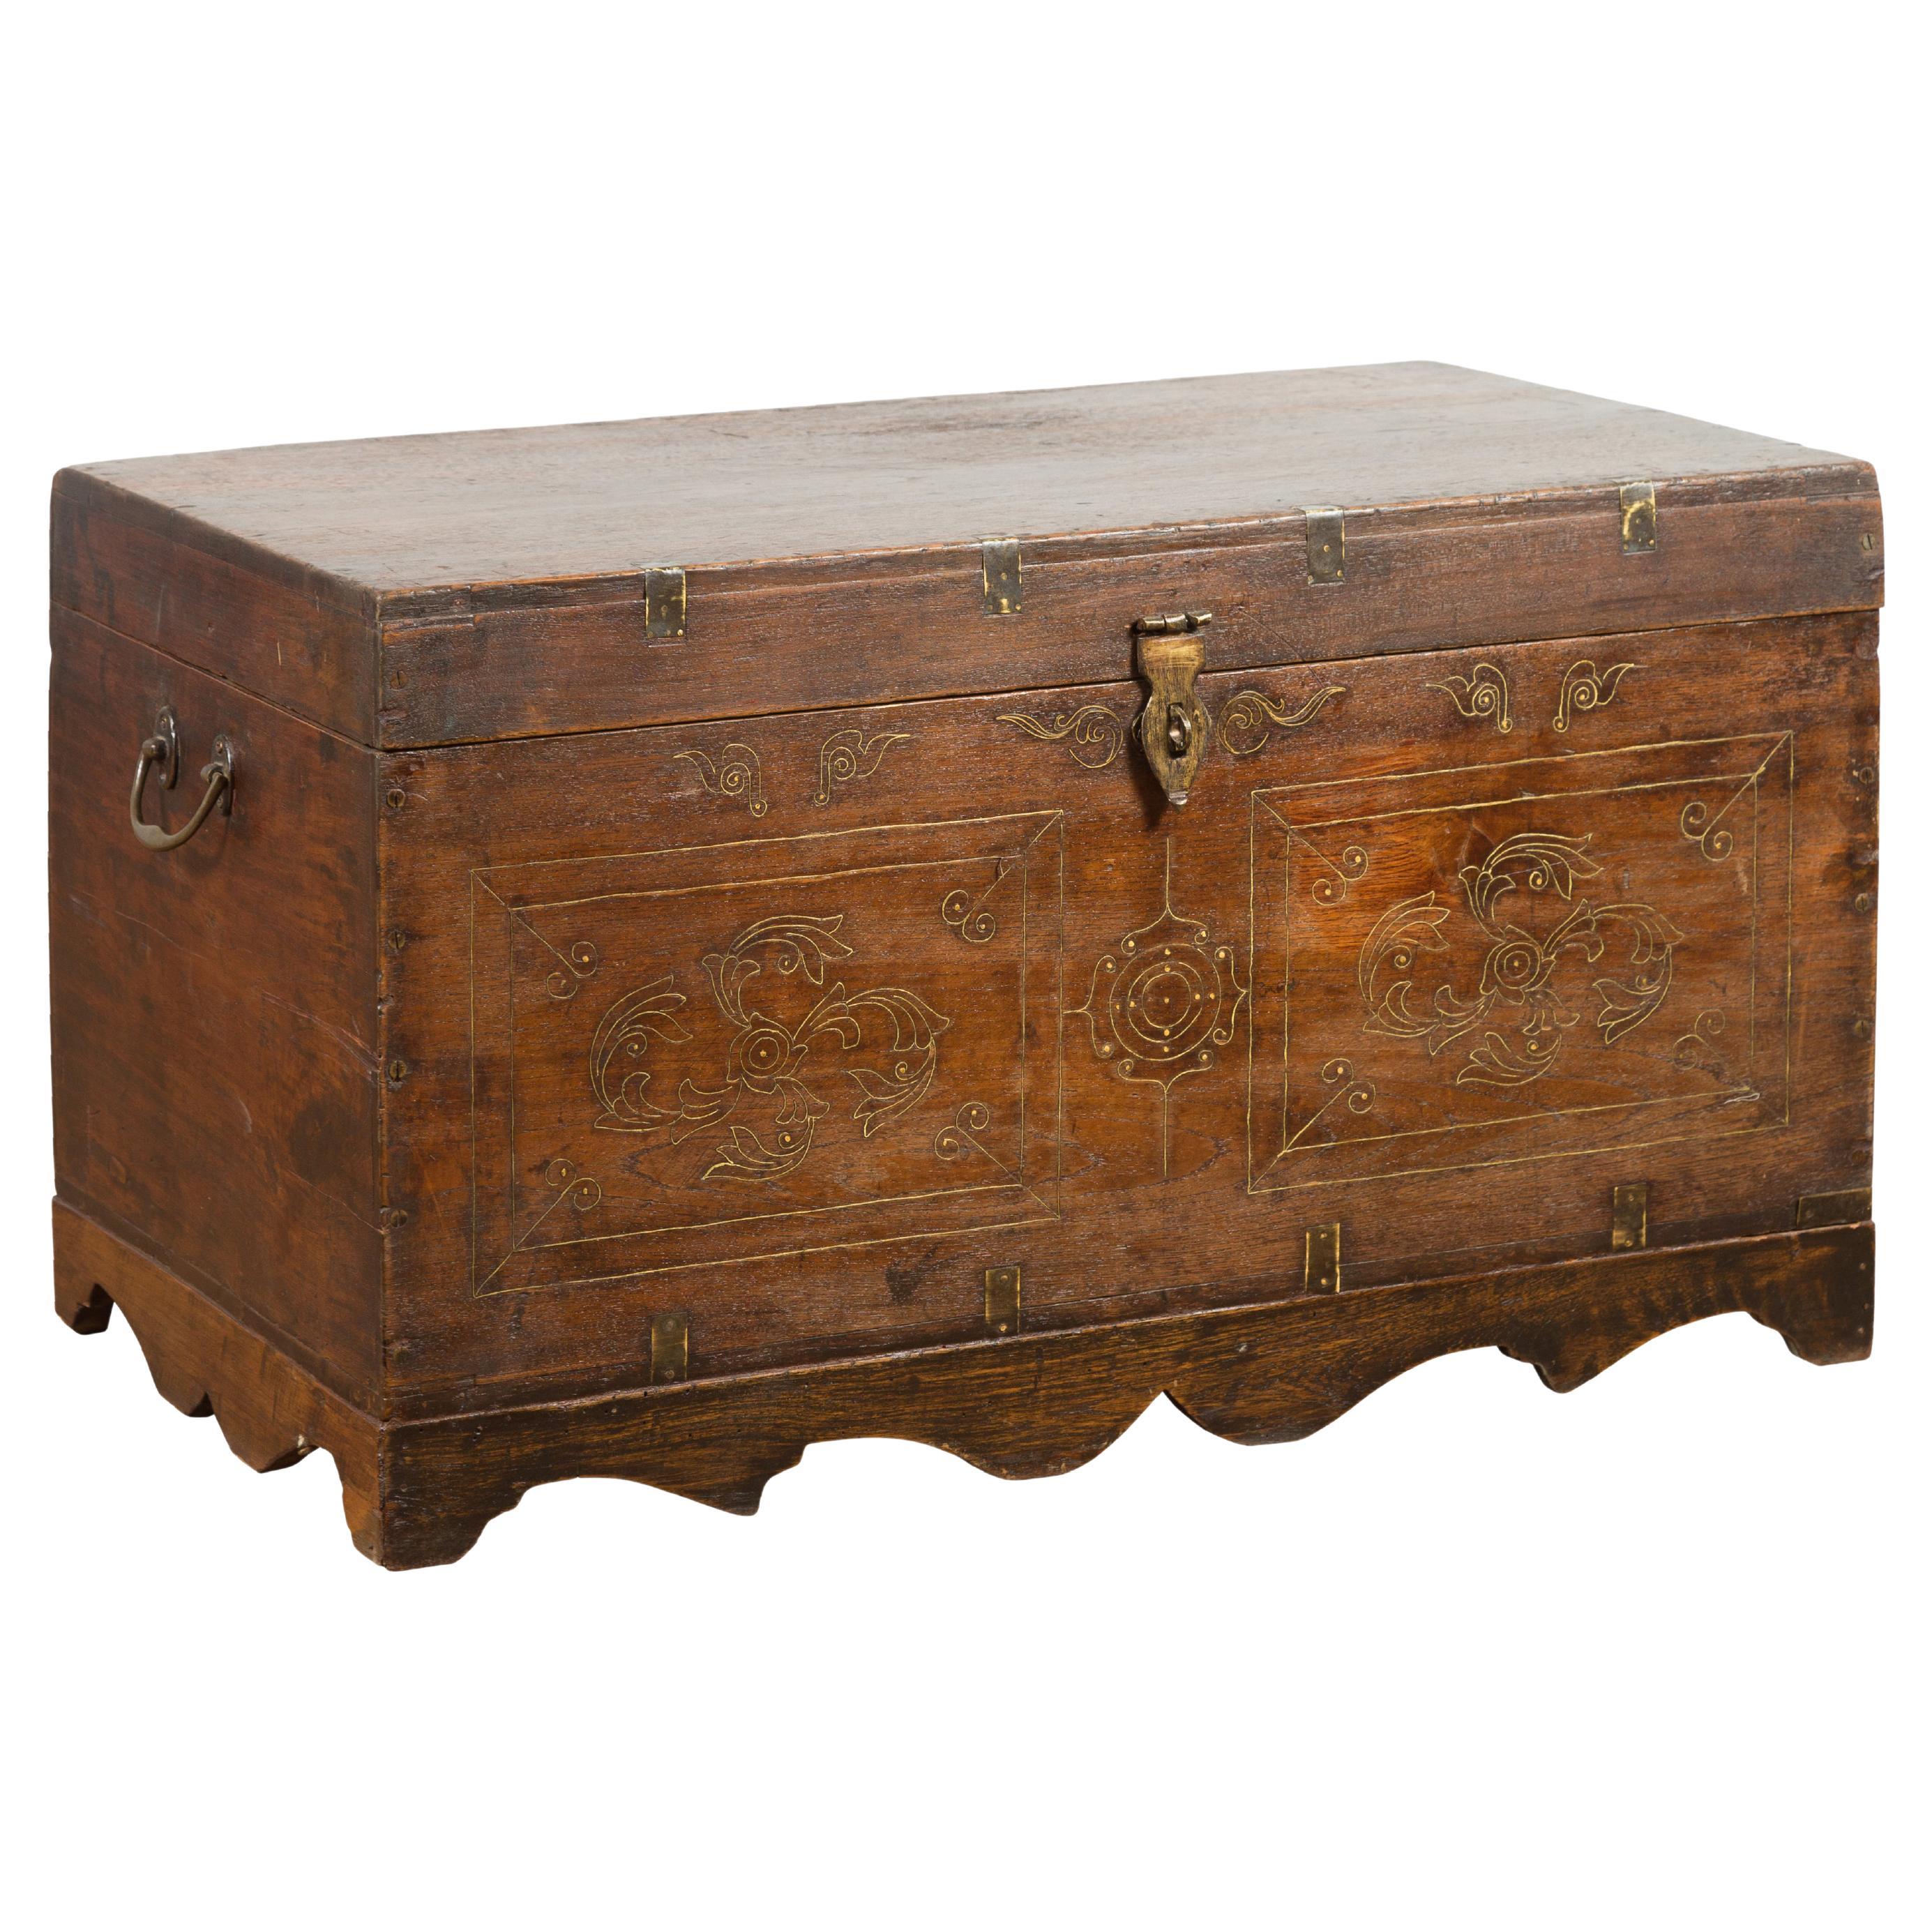 Indian Vintage Wedding Chest with Brass Foliage Décor and Multiple Compartments